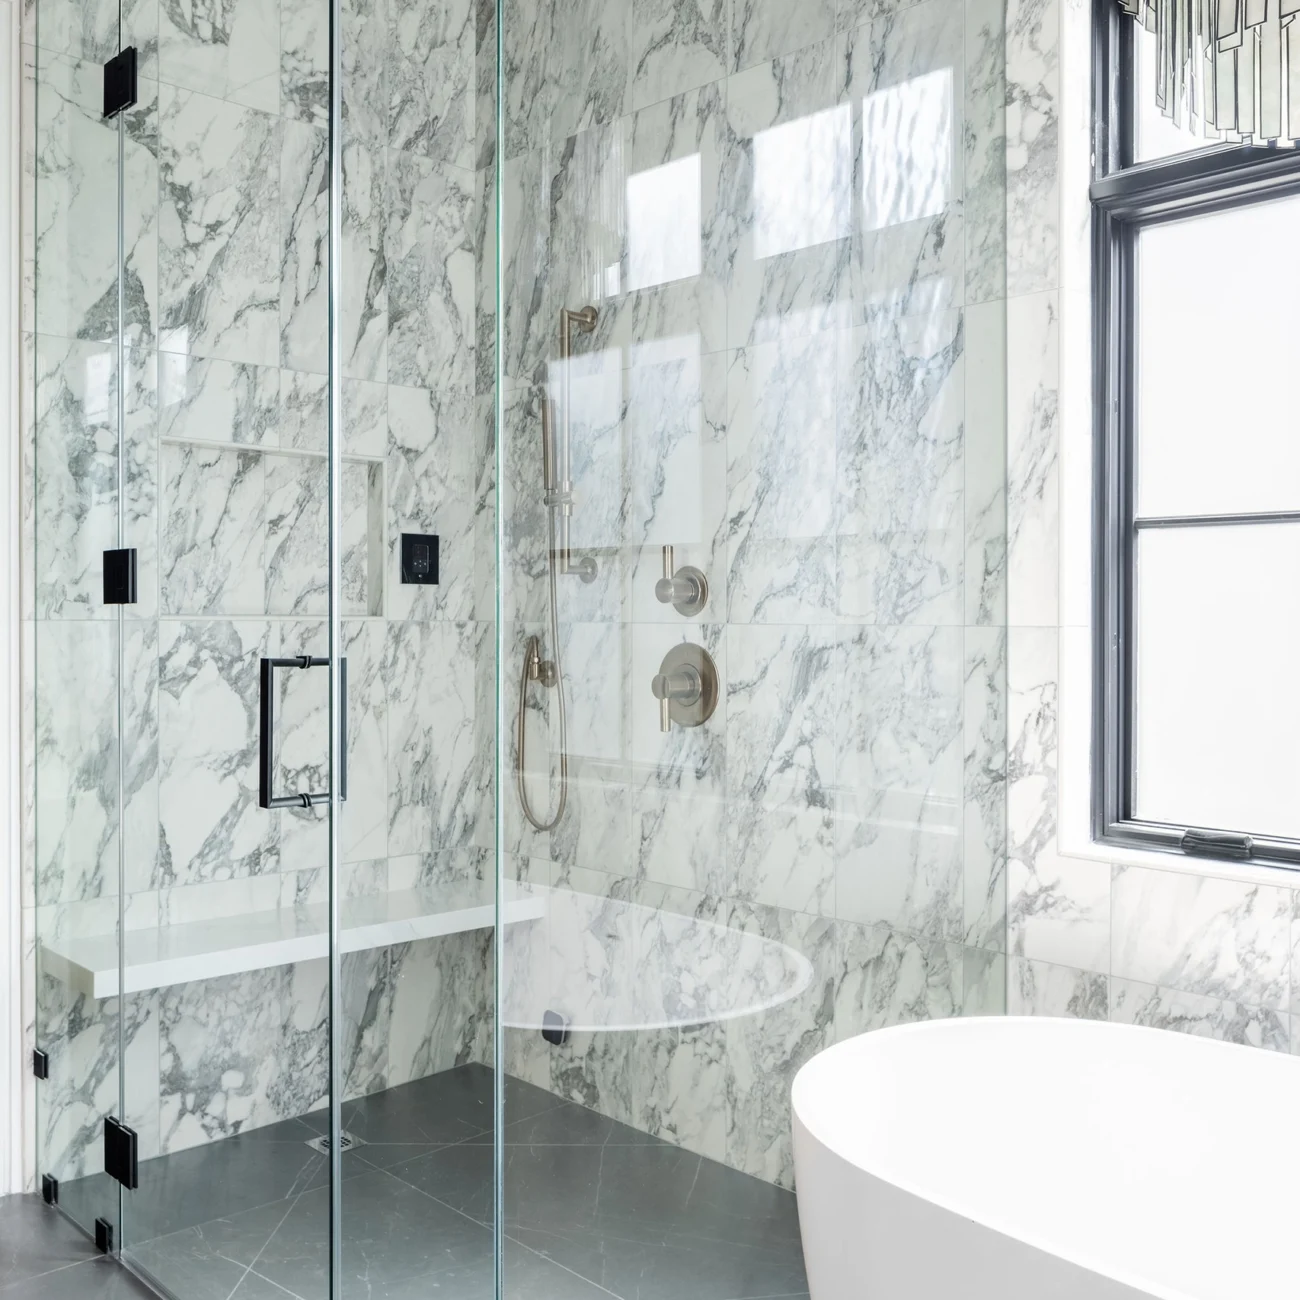 Christine Vroom Interiors | 36th | Costal bathroom with soaker tub and large glass shower